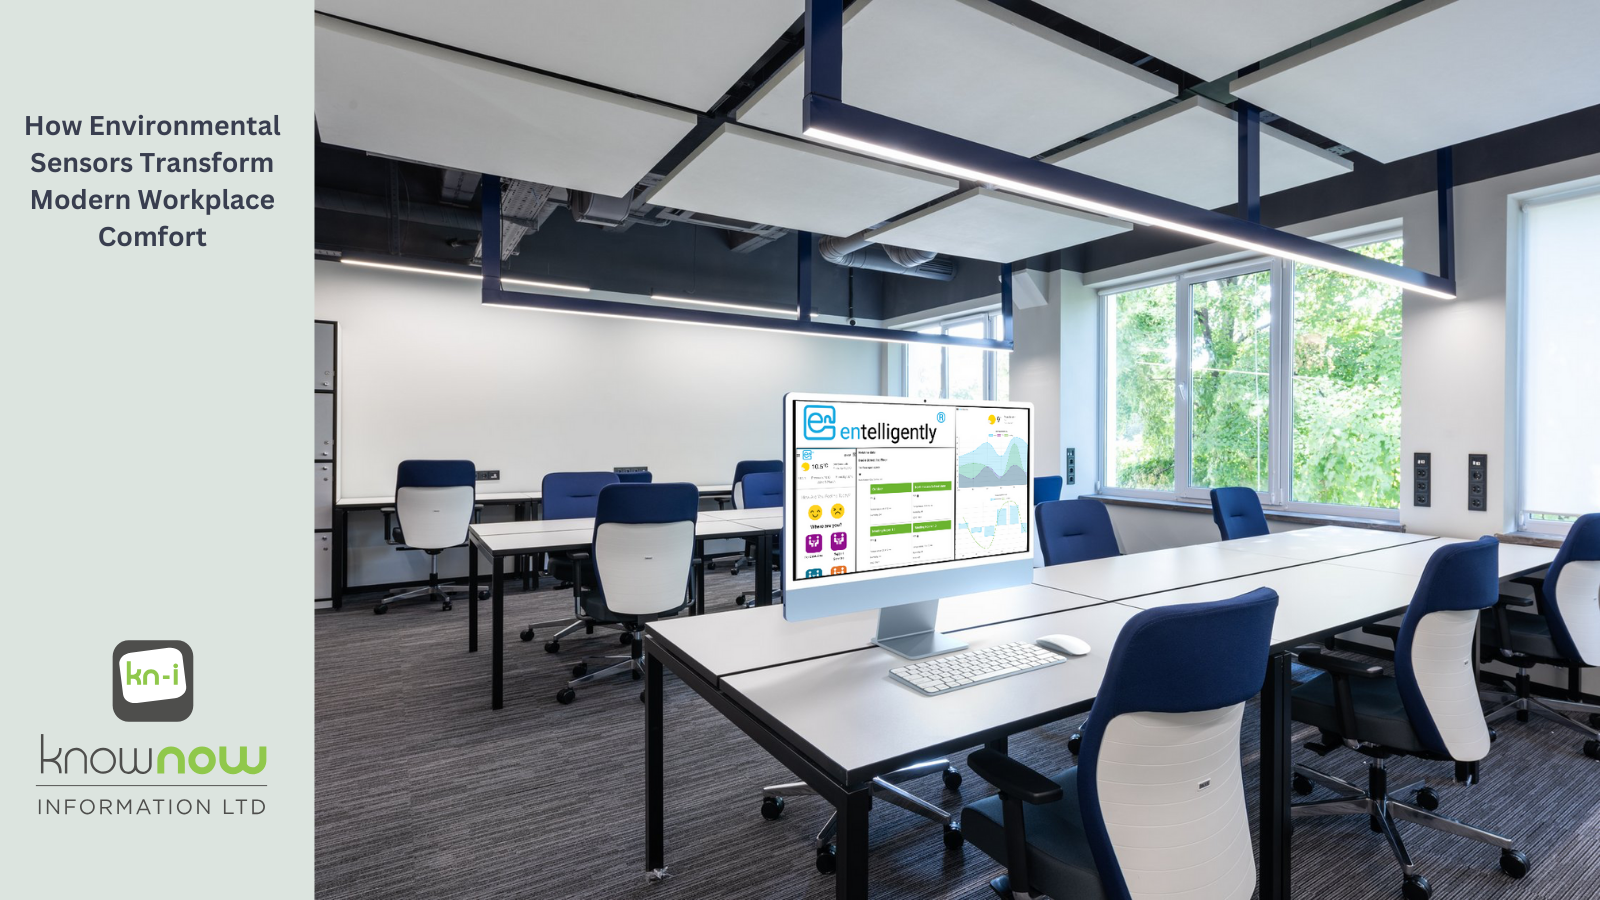 Modern office environment with empty workstations and large windows showcasing a green outdoor view. A computer screen displaying the Entelligently software interface is prominently featured, emphasizing environmental sensor data. The image includes text 'How Environmental Sensors Transform Modern Workplace Comfort' and the KnowNow Information Ltd logo on the left side.